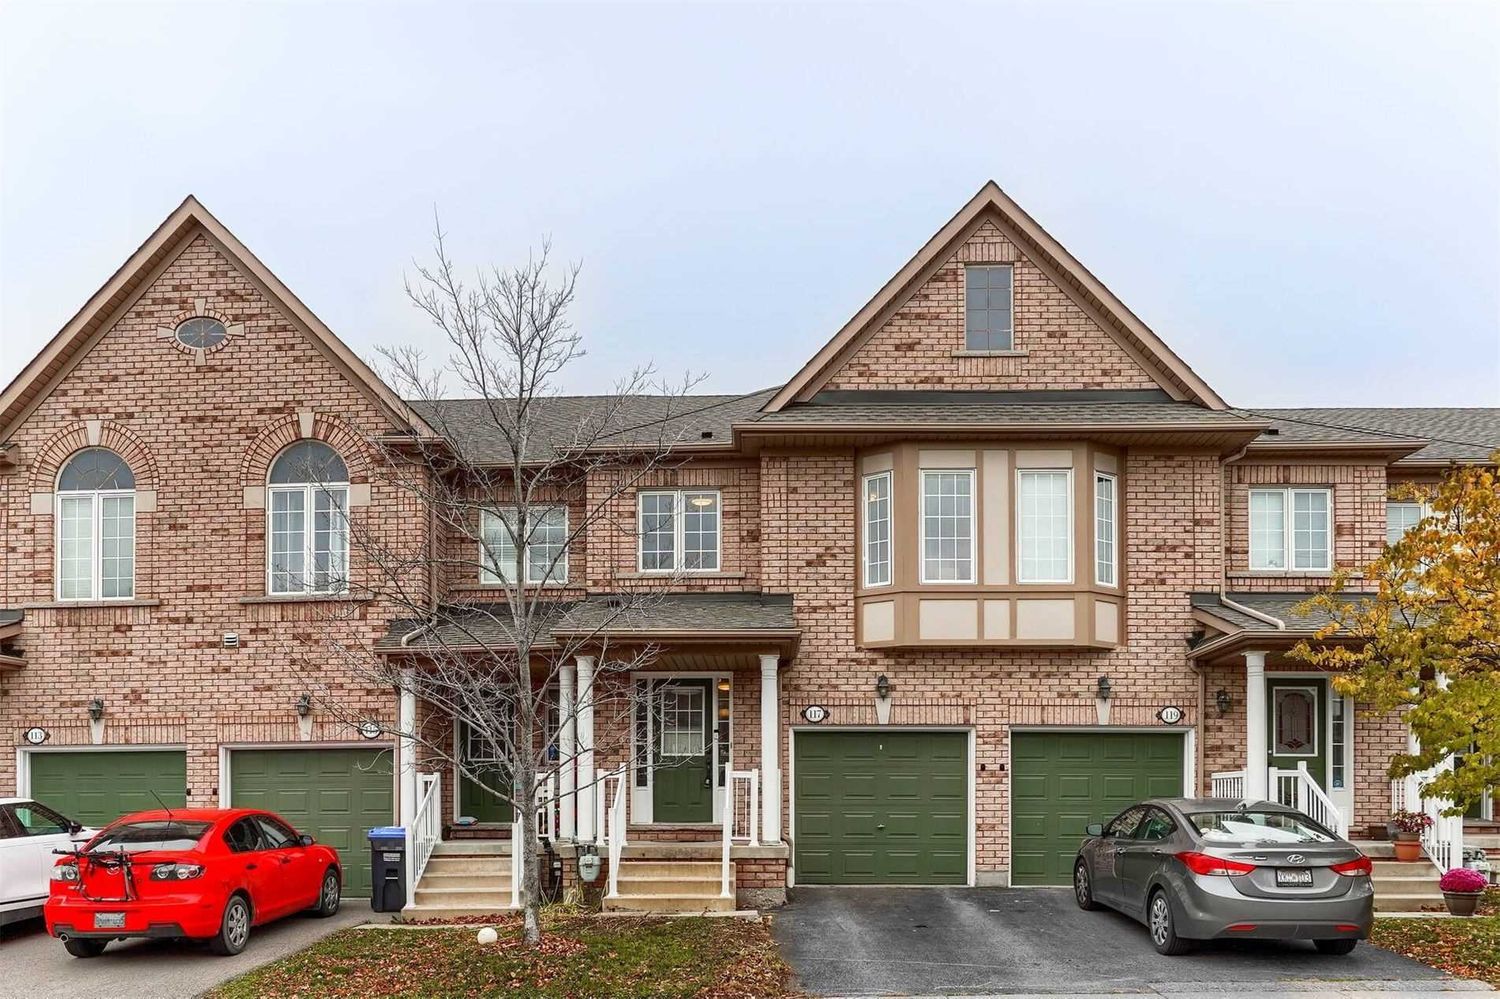 770 Othello Court. 770 Othello Court Townhomes is located in  Mississauga, Toronto - image #1 of 2